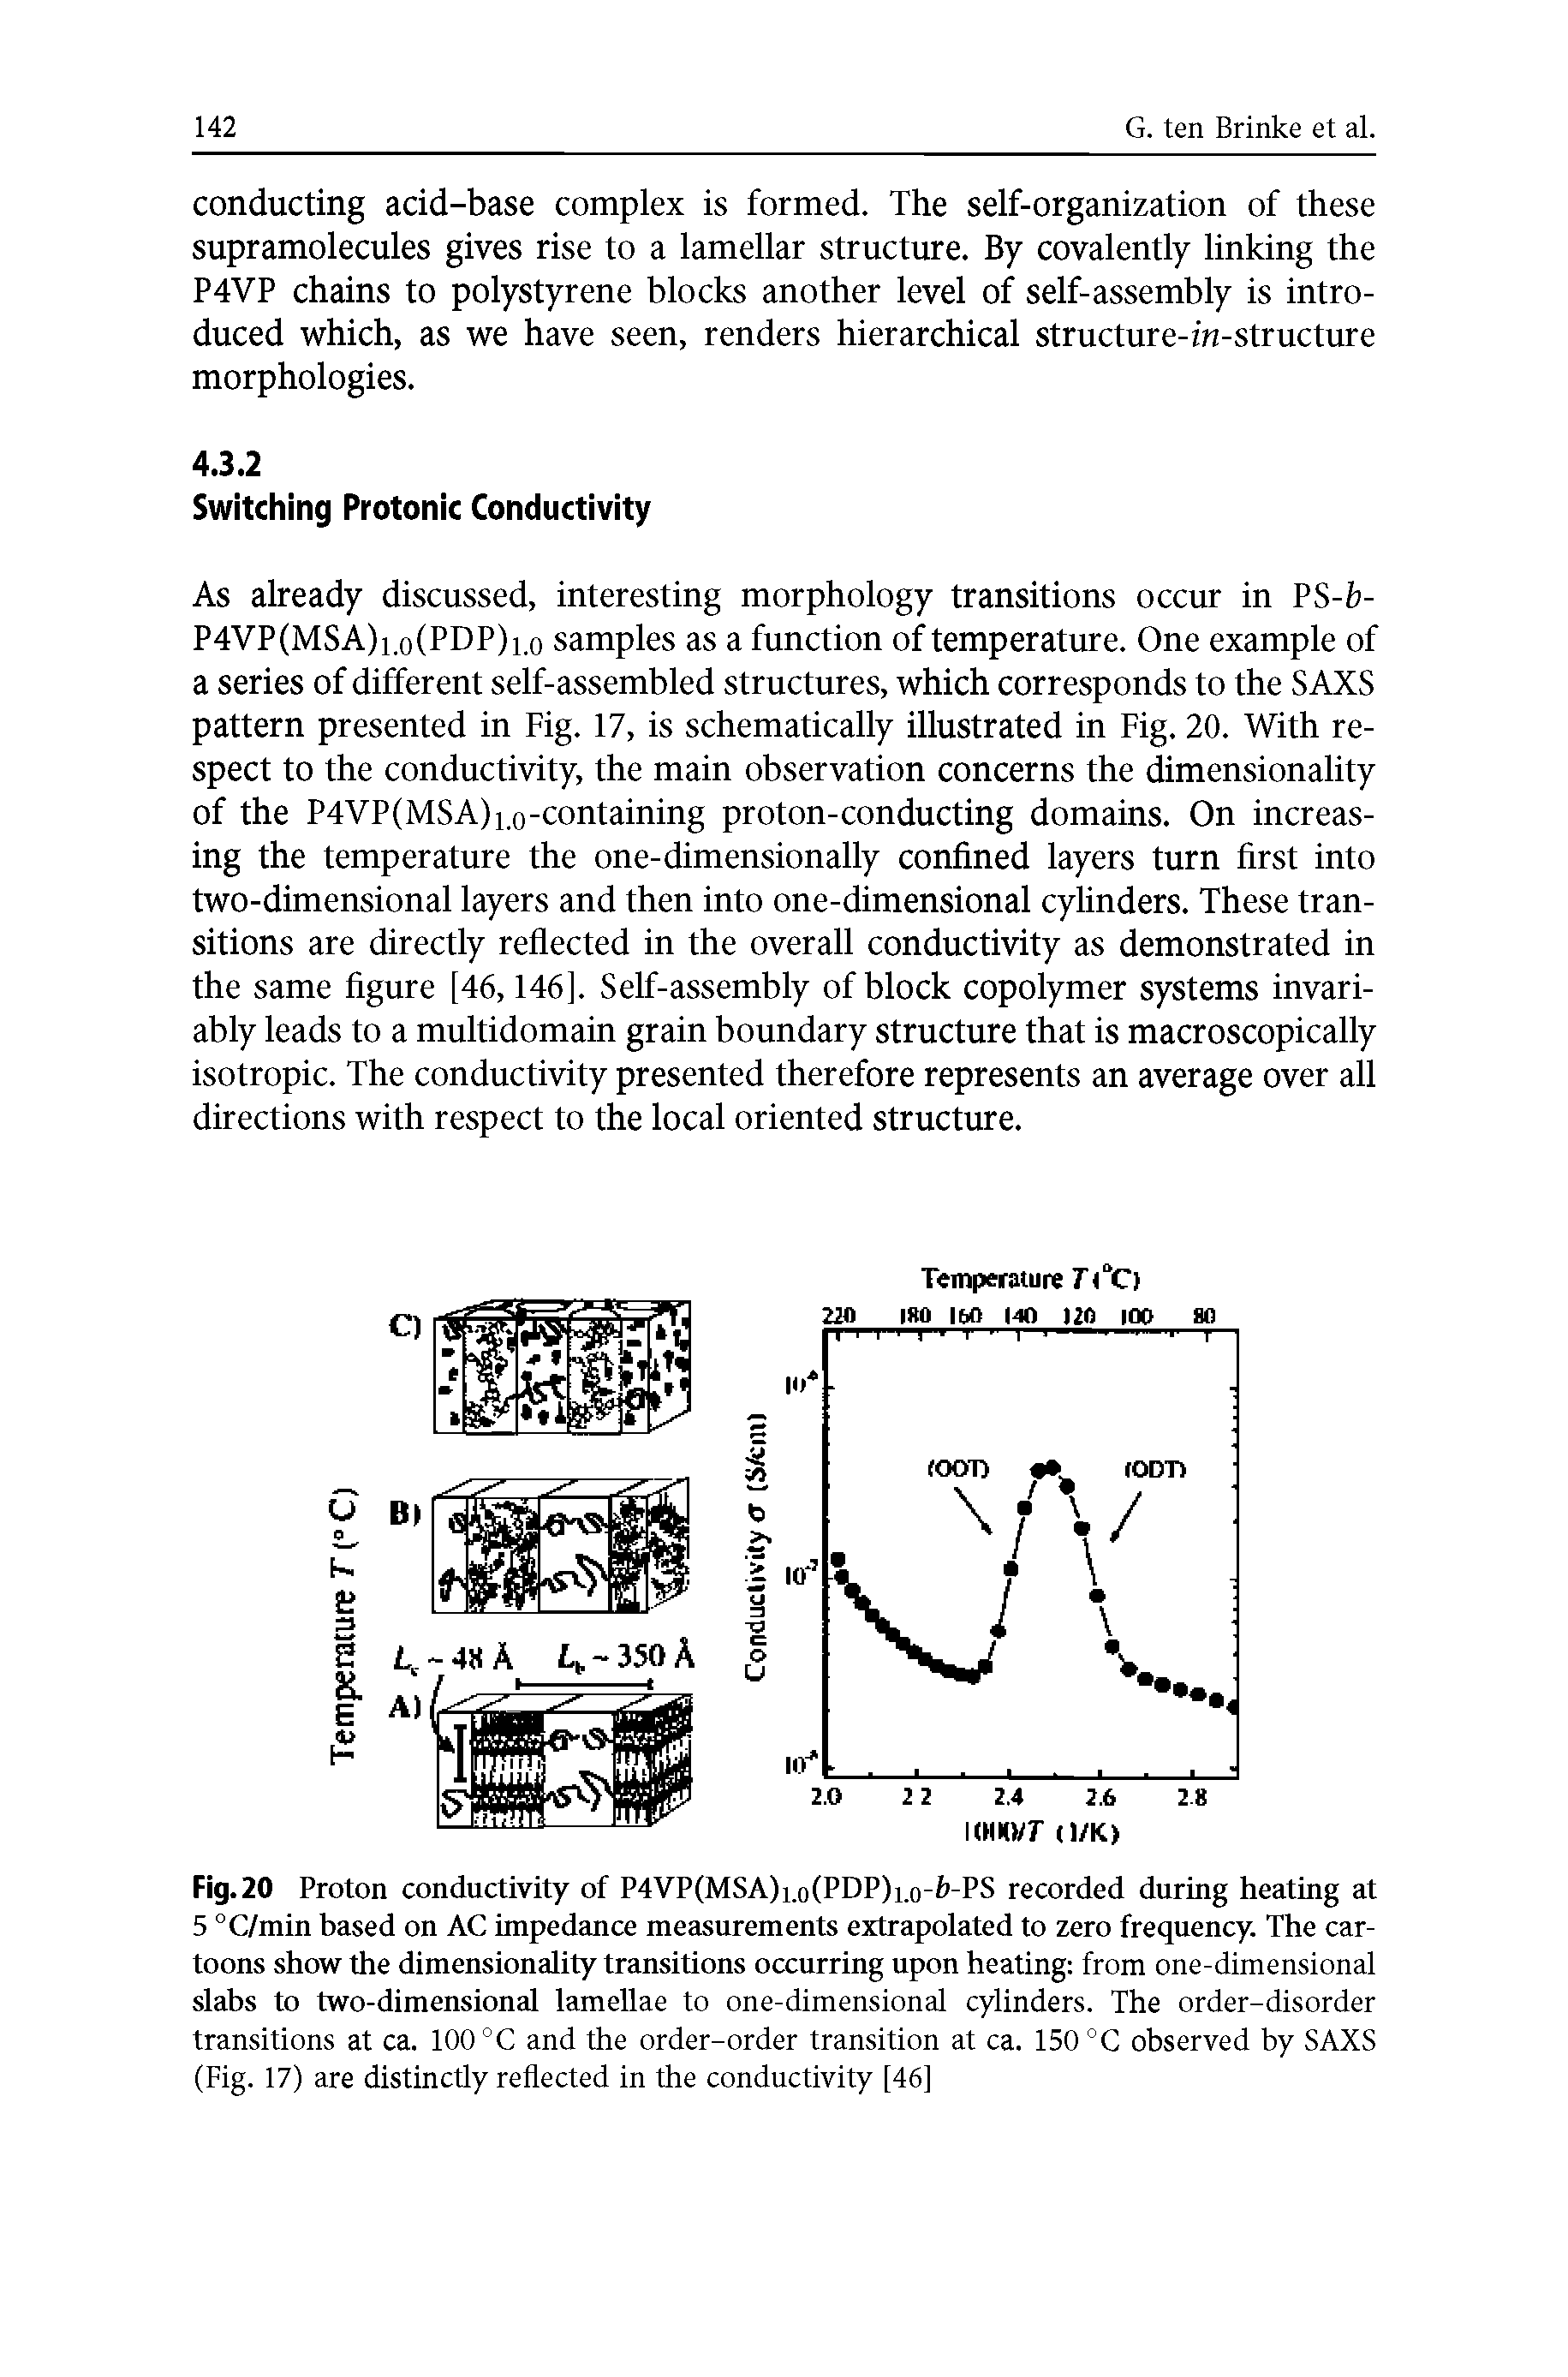 Fig.20 Proton conductivity of P4VP(MSA)i.o(PDP)i.o-fc-PS recorded during heating at 5 °C/min based on AC impedance measurements extrapolated to zero frequency. The cartoons show the dimensionality transitions occurring upon heating from one-dimensional slabs to two-dimensional lamellae to one-dimensional cylinders. The order-disorder transitions at ca. 100 °C and the order-order transition at ca. 150 °C observed by SAXS (Fig. 17) are distinctly reflected in the conductivity [46]...